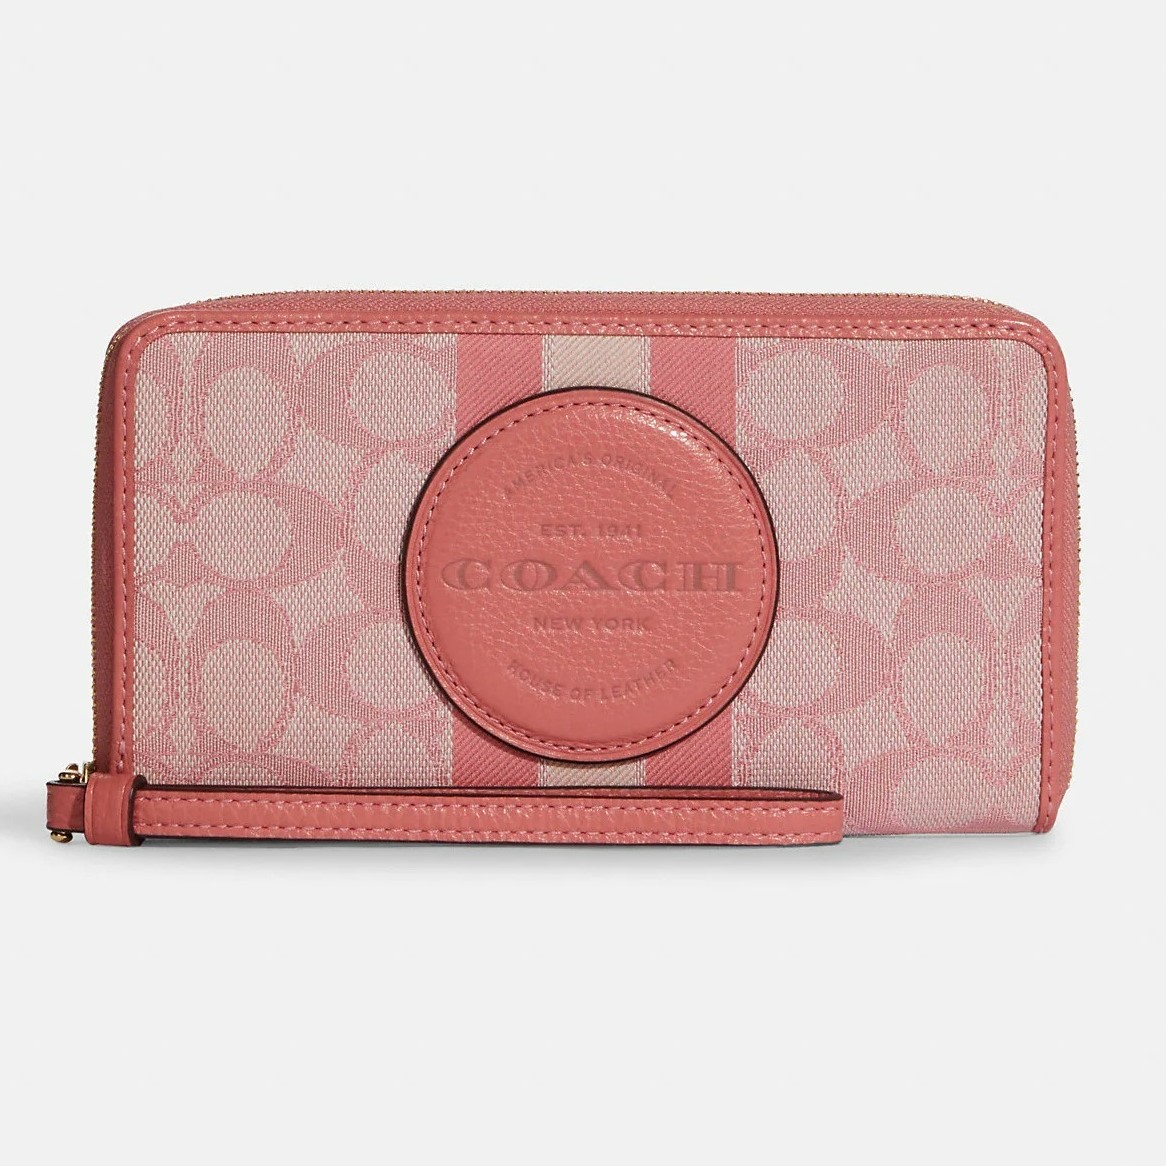 VÍ COACH DEMPSEY LARGE PHONE WALLET IN SIGNATURE JACQUARD WITH STRIPE AND COACH PATCH 1